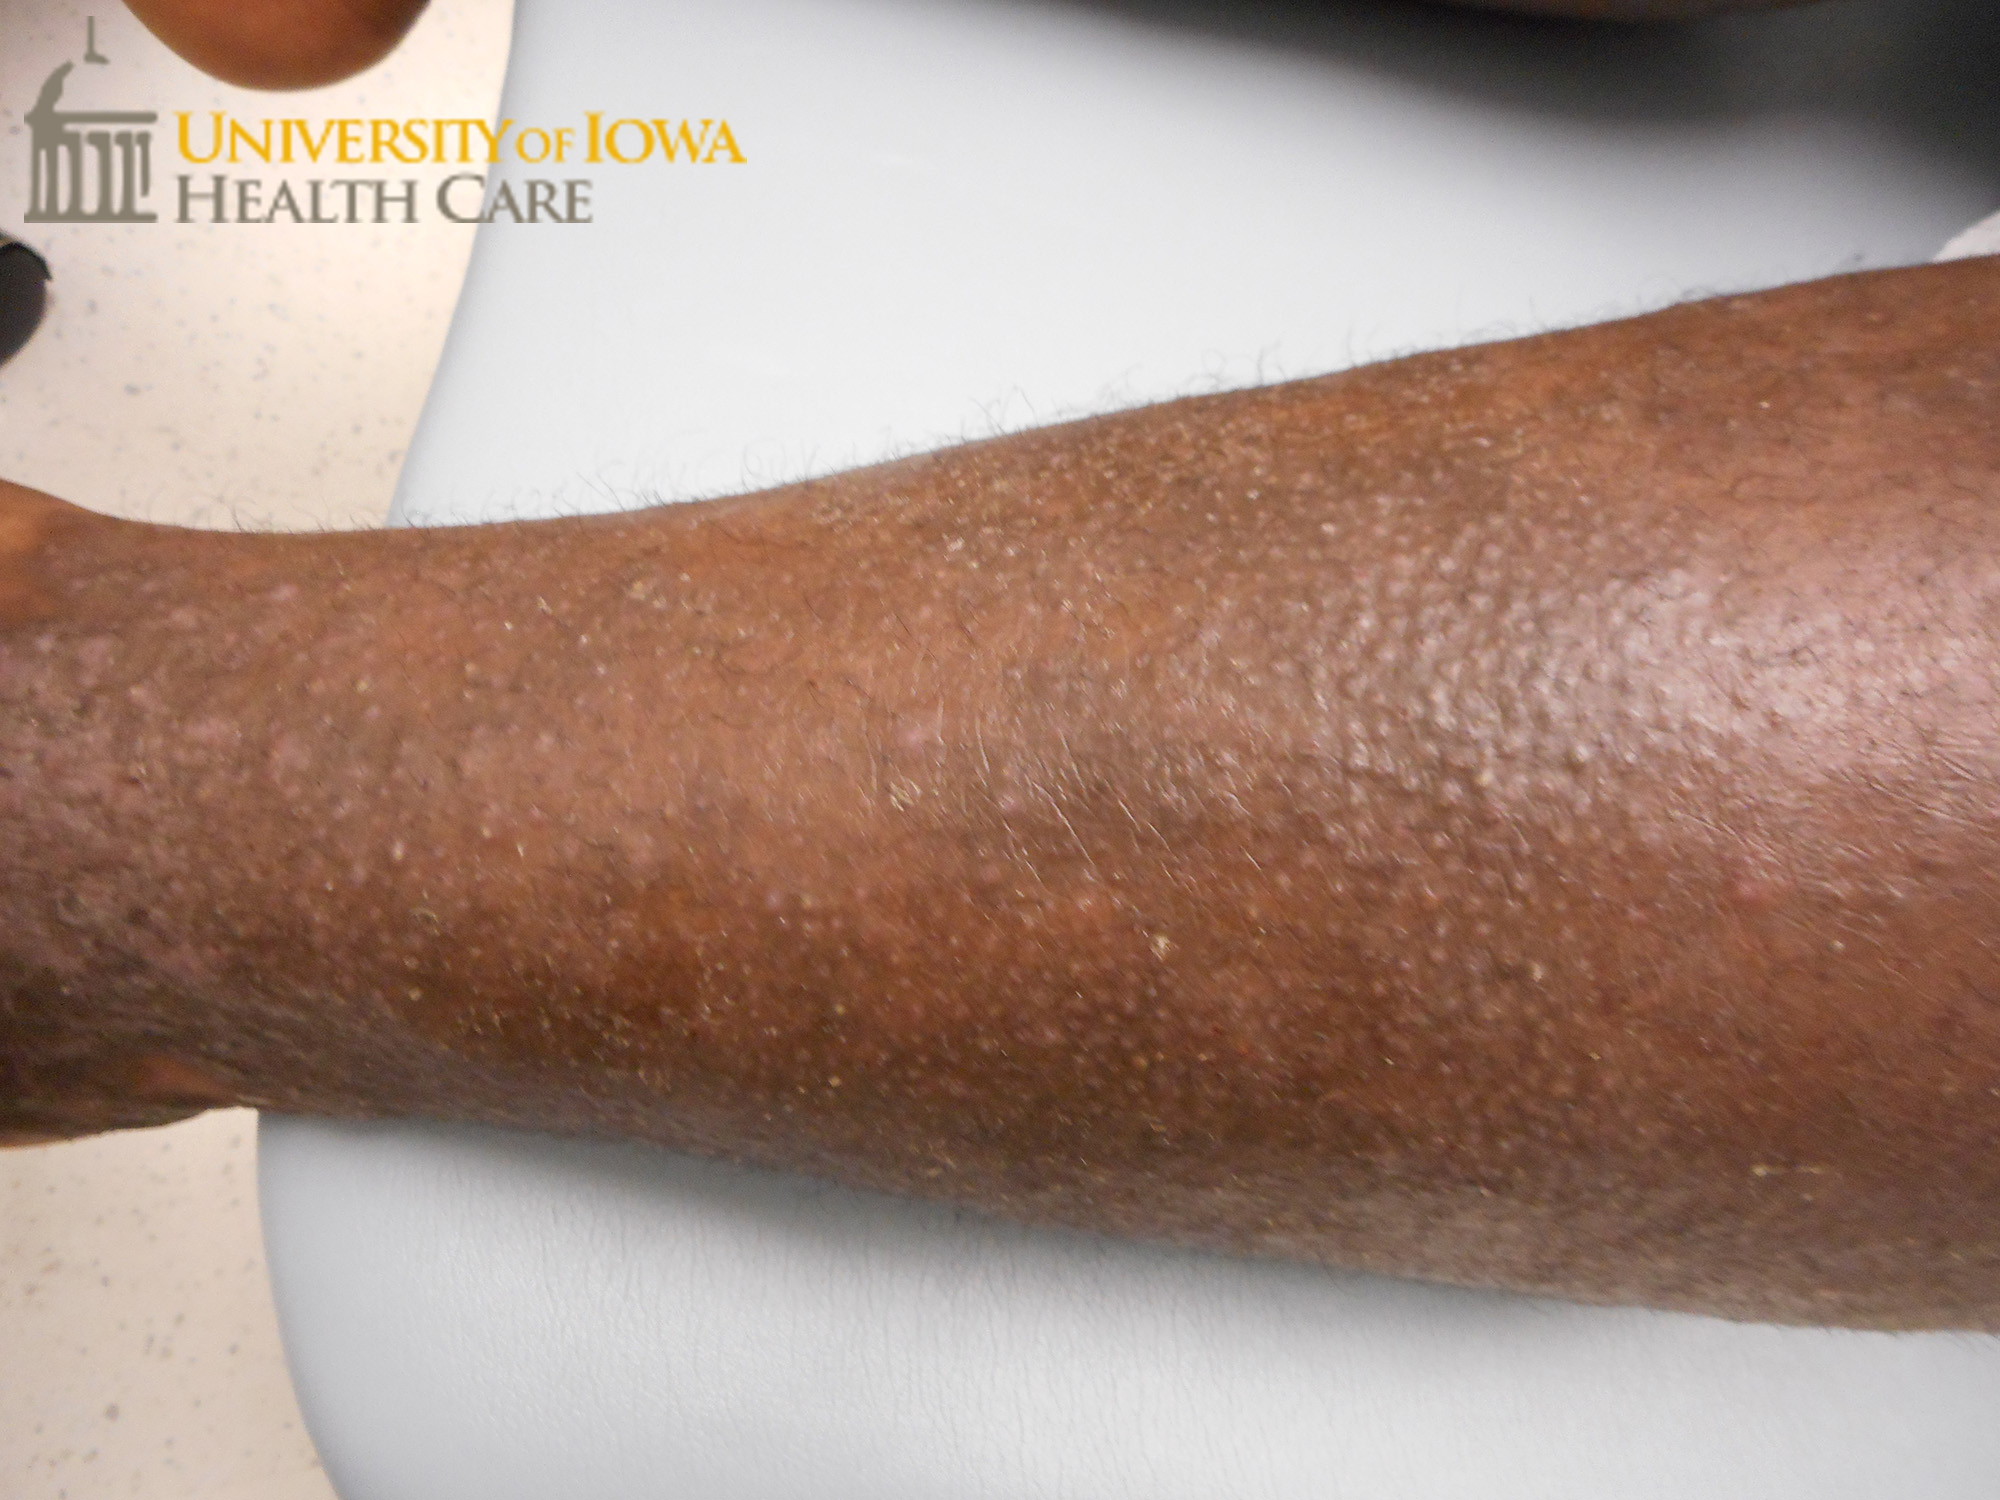 Pinkfolliculocentric papules coalescing into plaques on the lower leg. (click images for higher resolution).